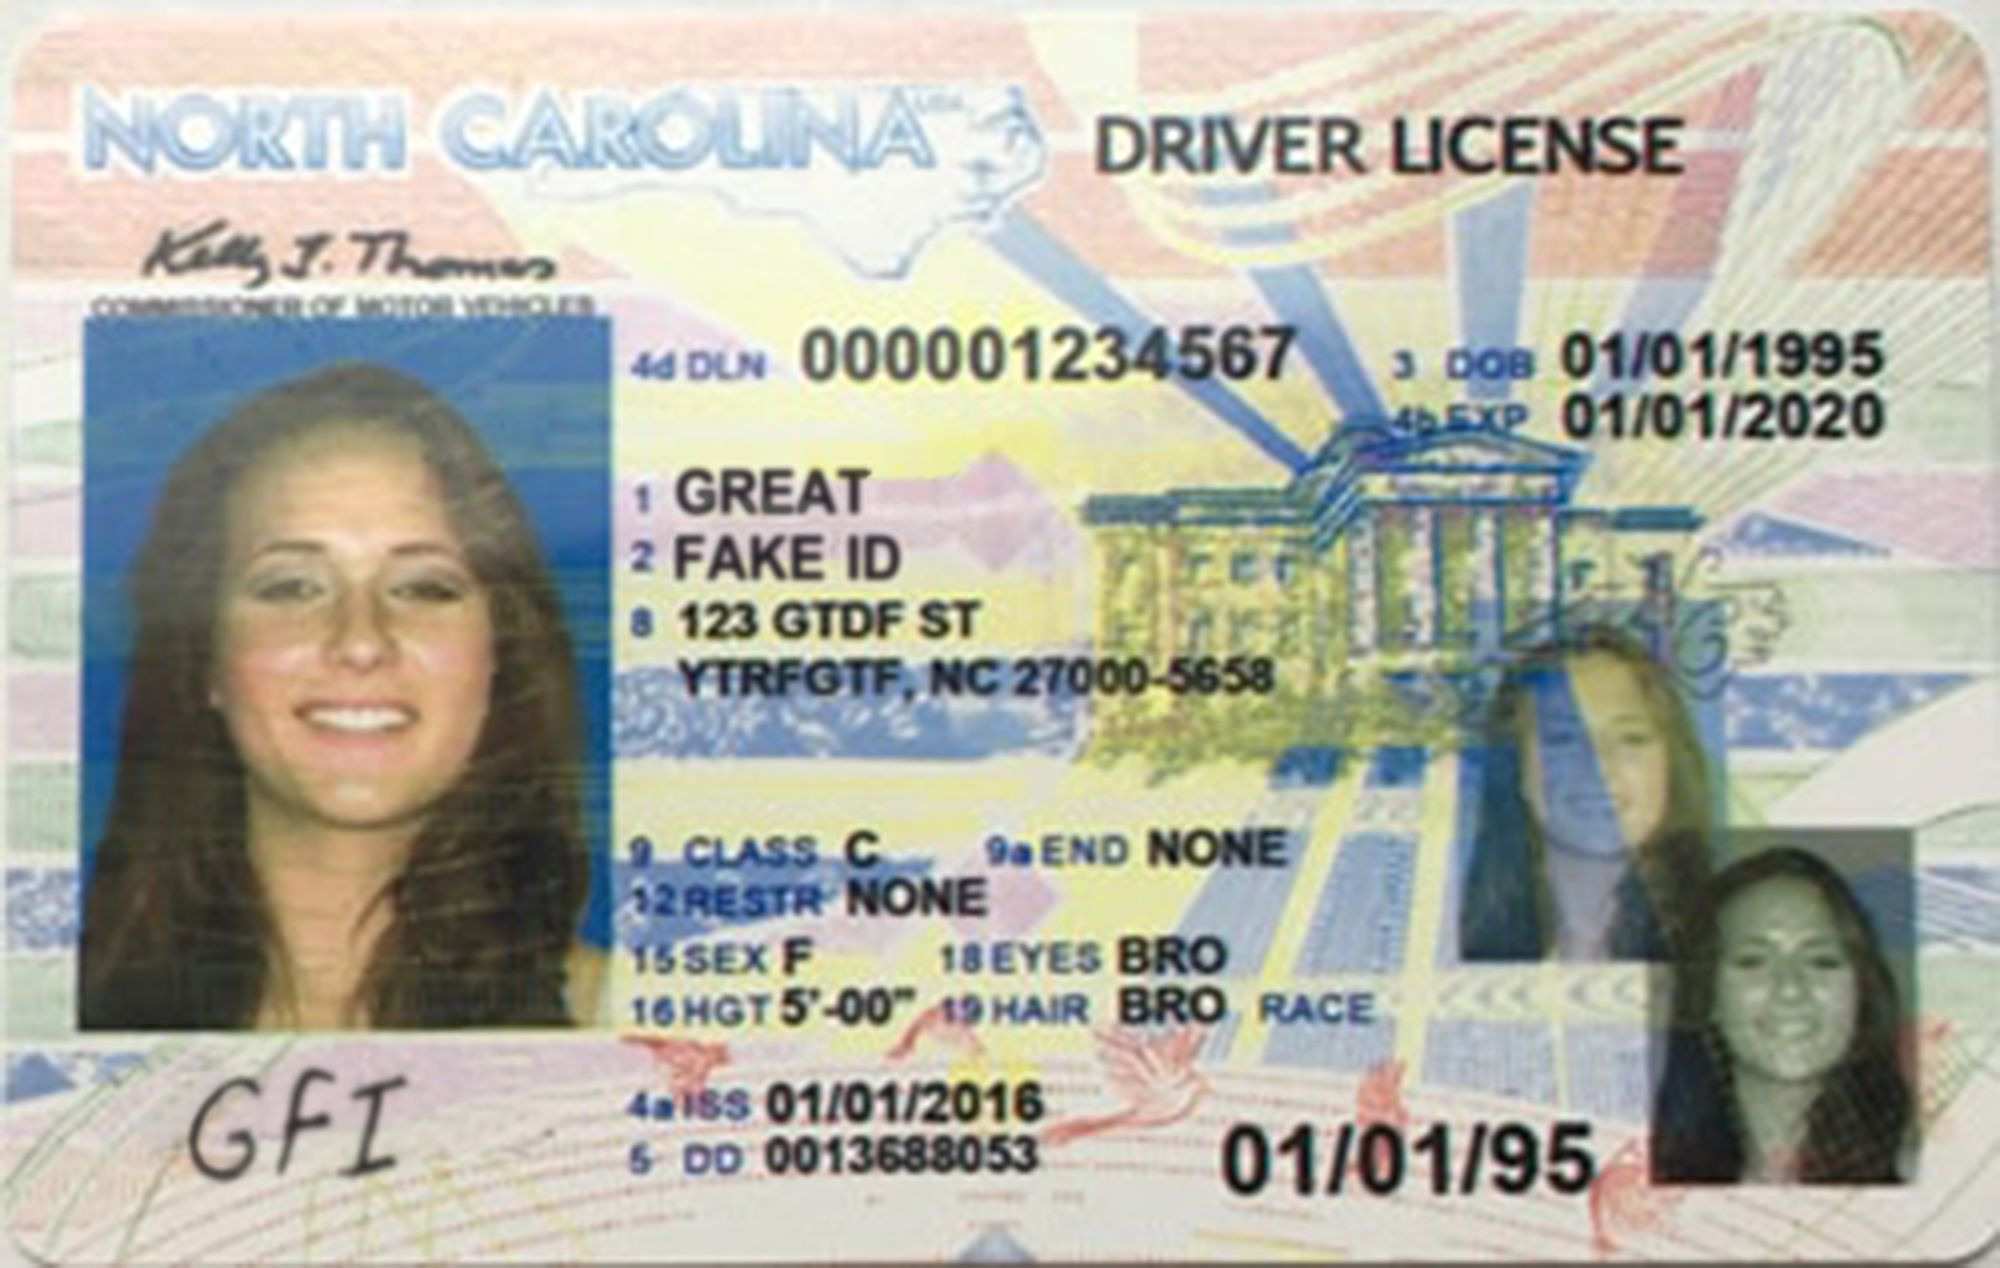 22 Standard Georgia Id Card Template Formating by Georgia Id Card Regarding Georgia Id Card Template